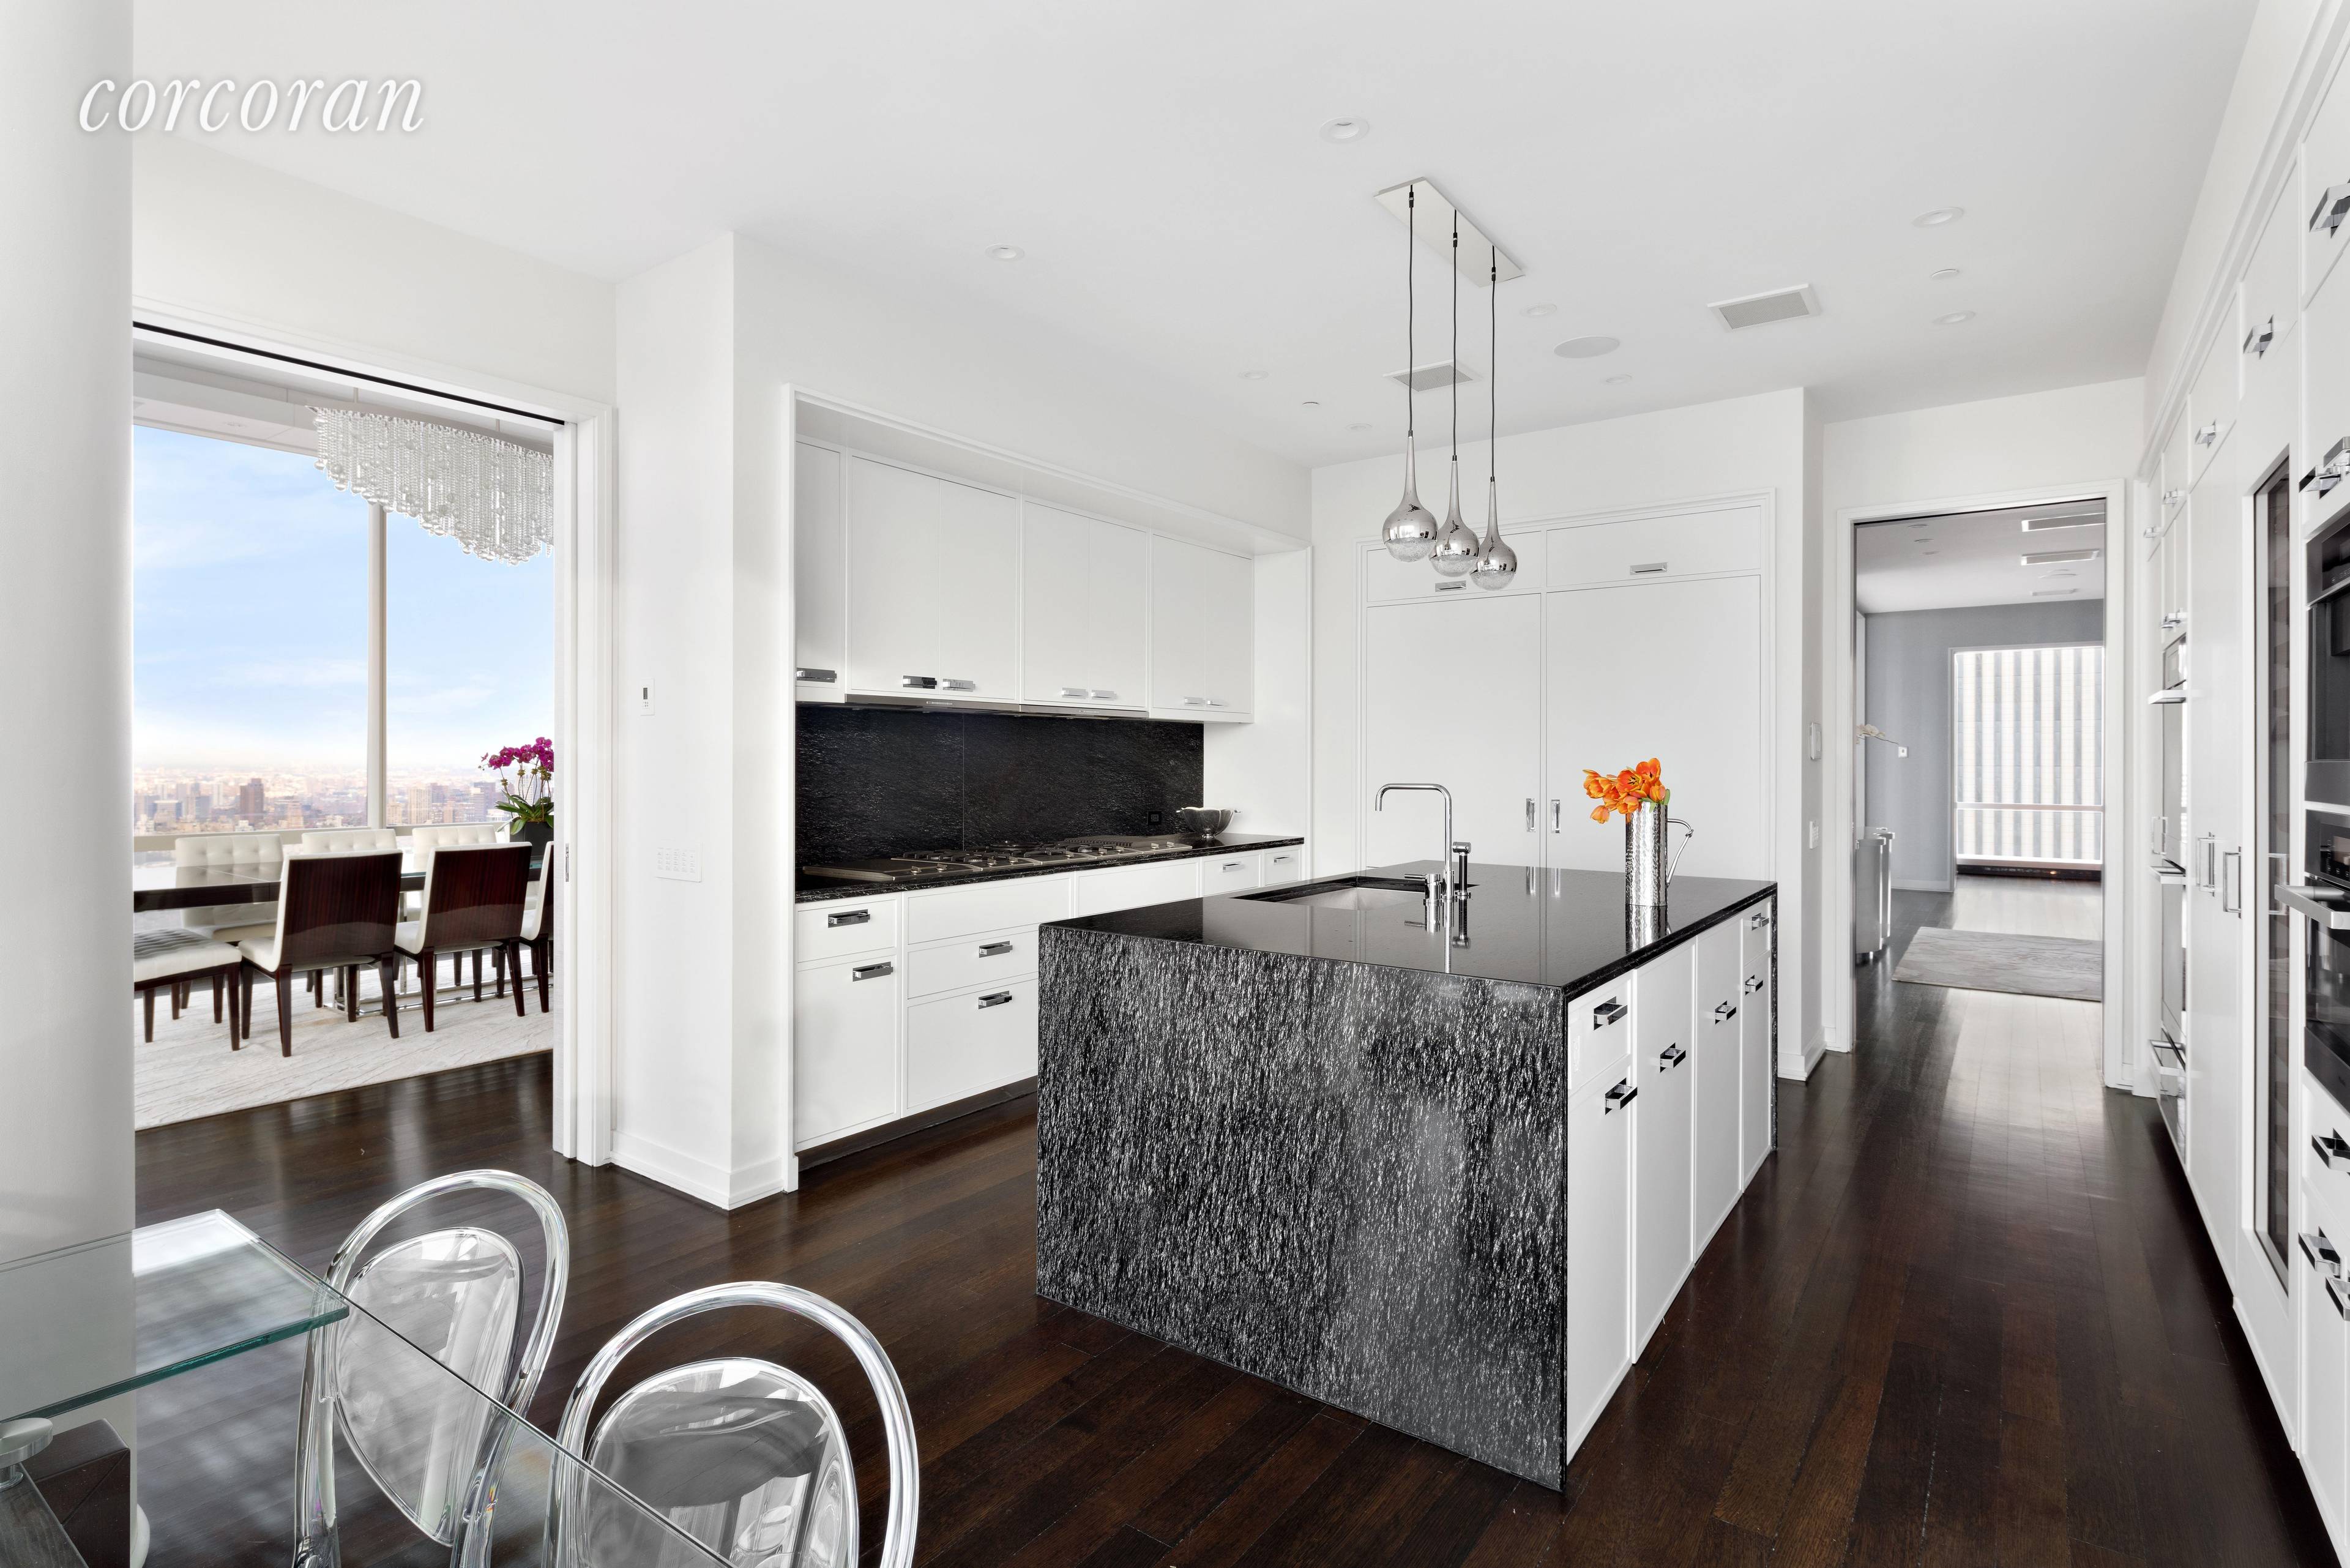 Residence 58A at One57 Spectacular Central Park Views and Modern Design Three Bedrooms Four Baths Powder Room 4, 483 sqft This 58th floor A line residence at One57 offers spectacular ...